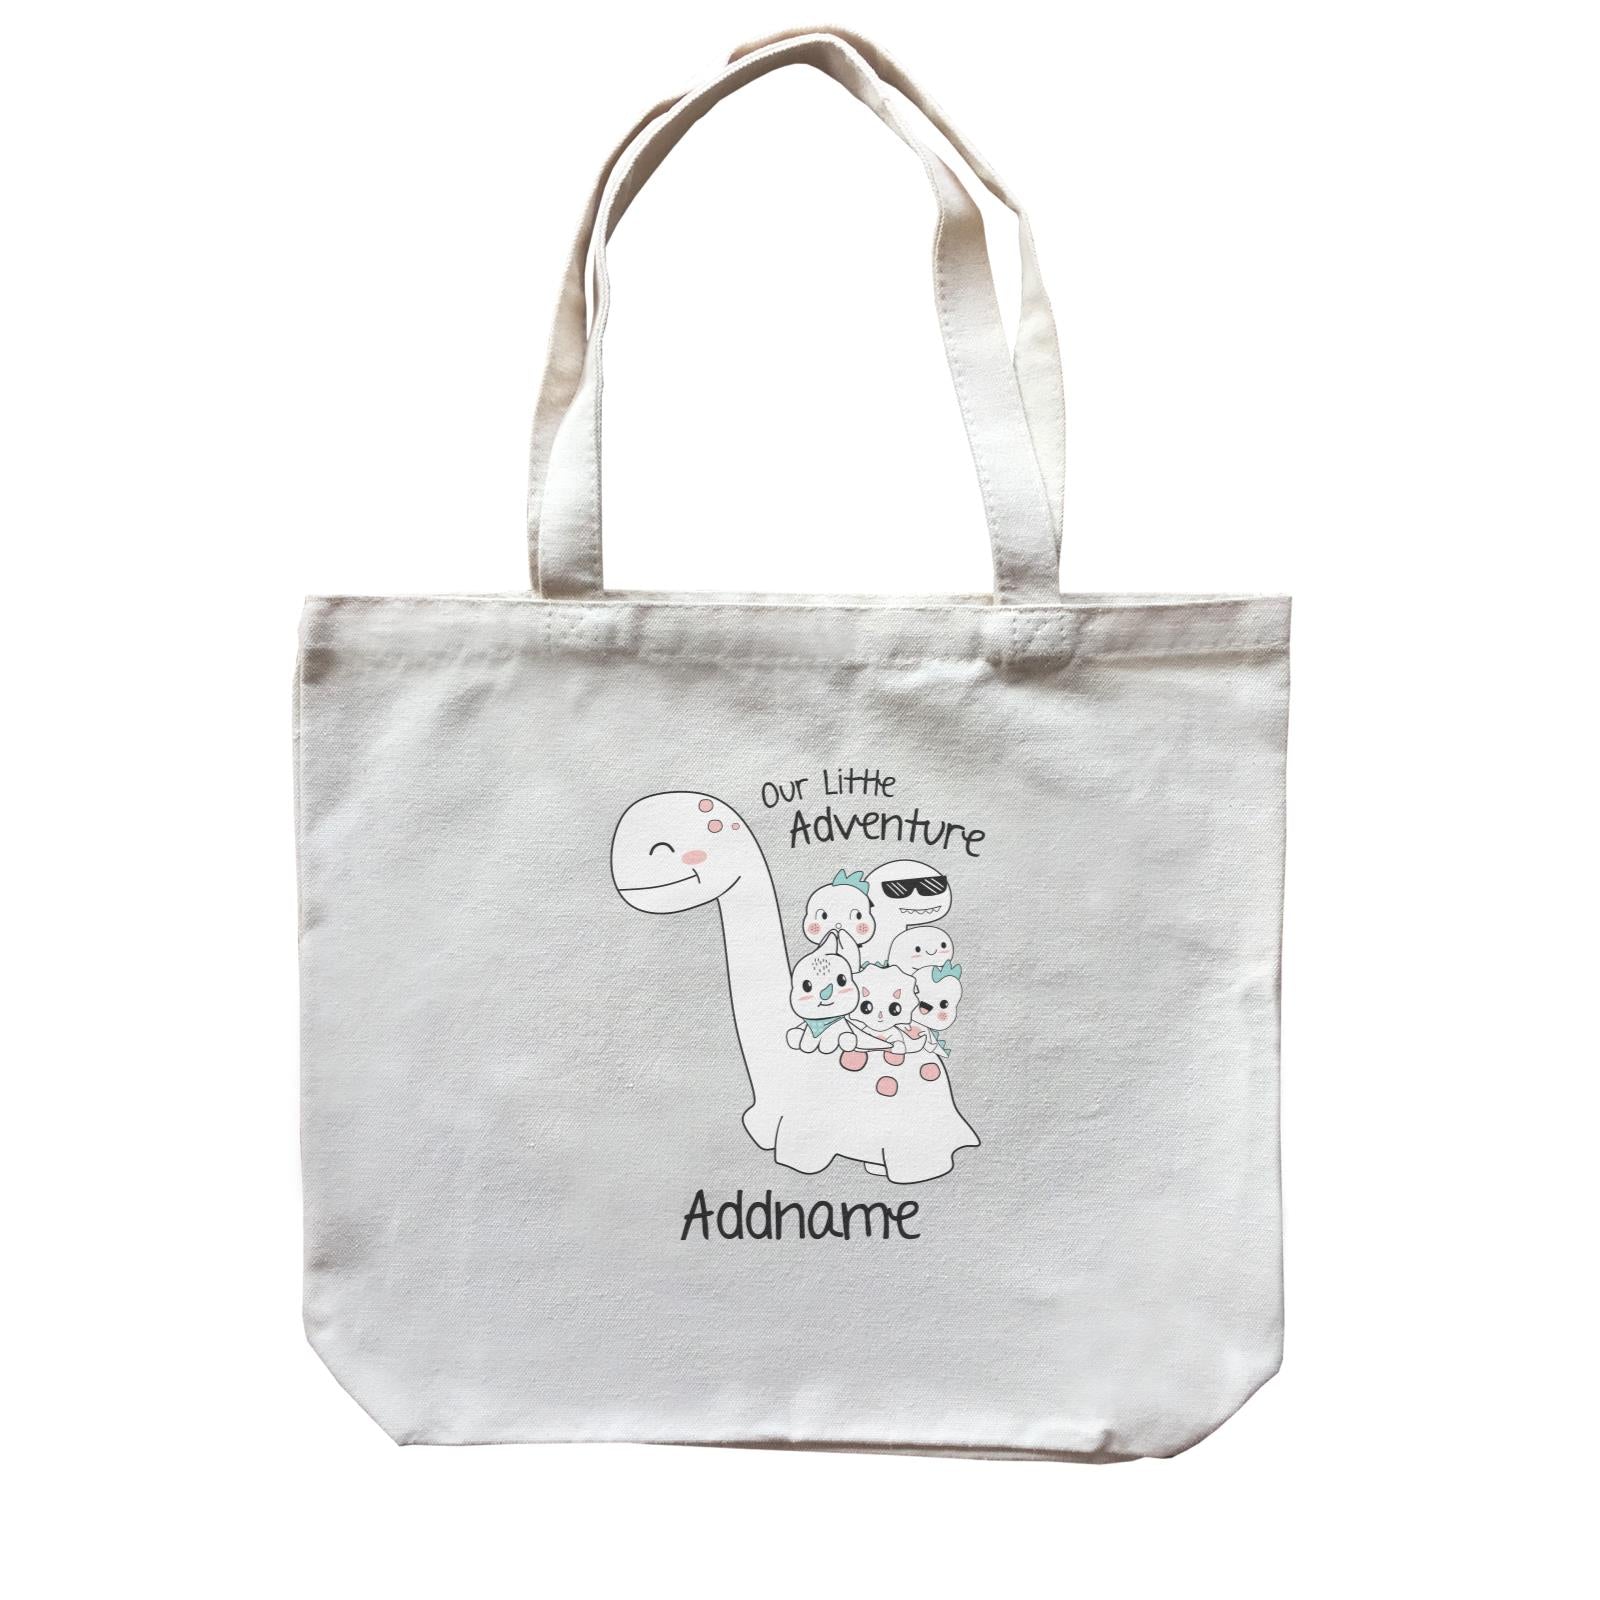 Cute Animals And Friends Series Cute Little Dinosaur Our Little Adventure Addname Canvas Bag